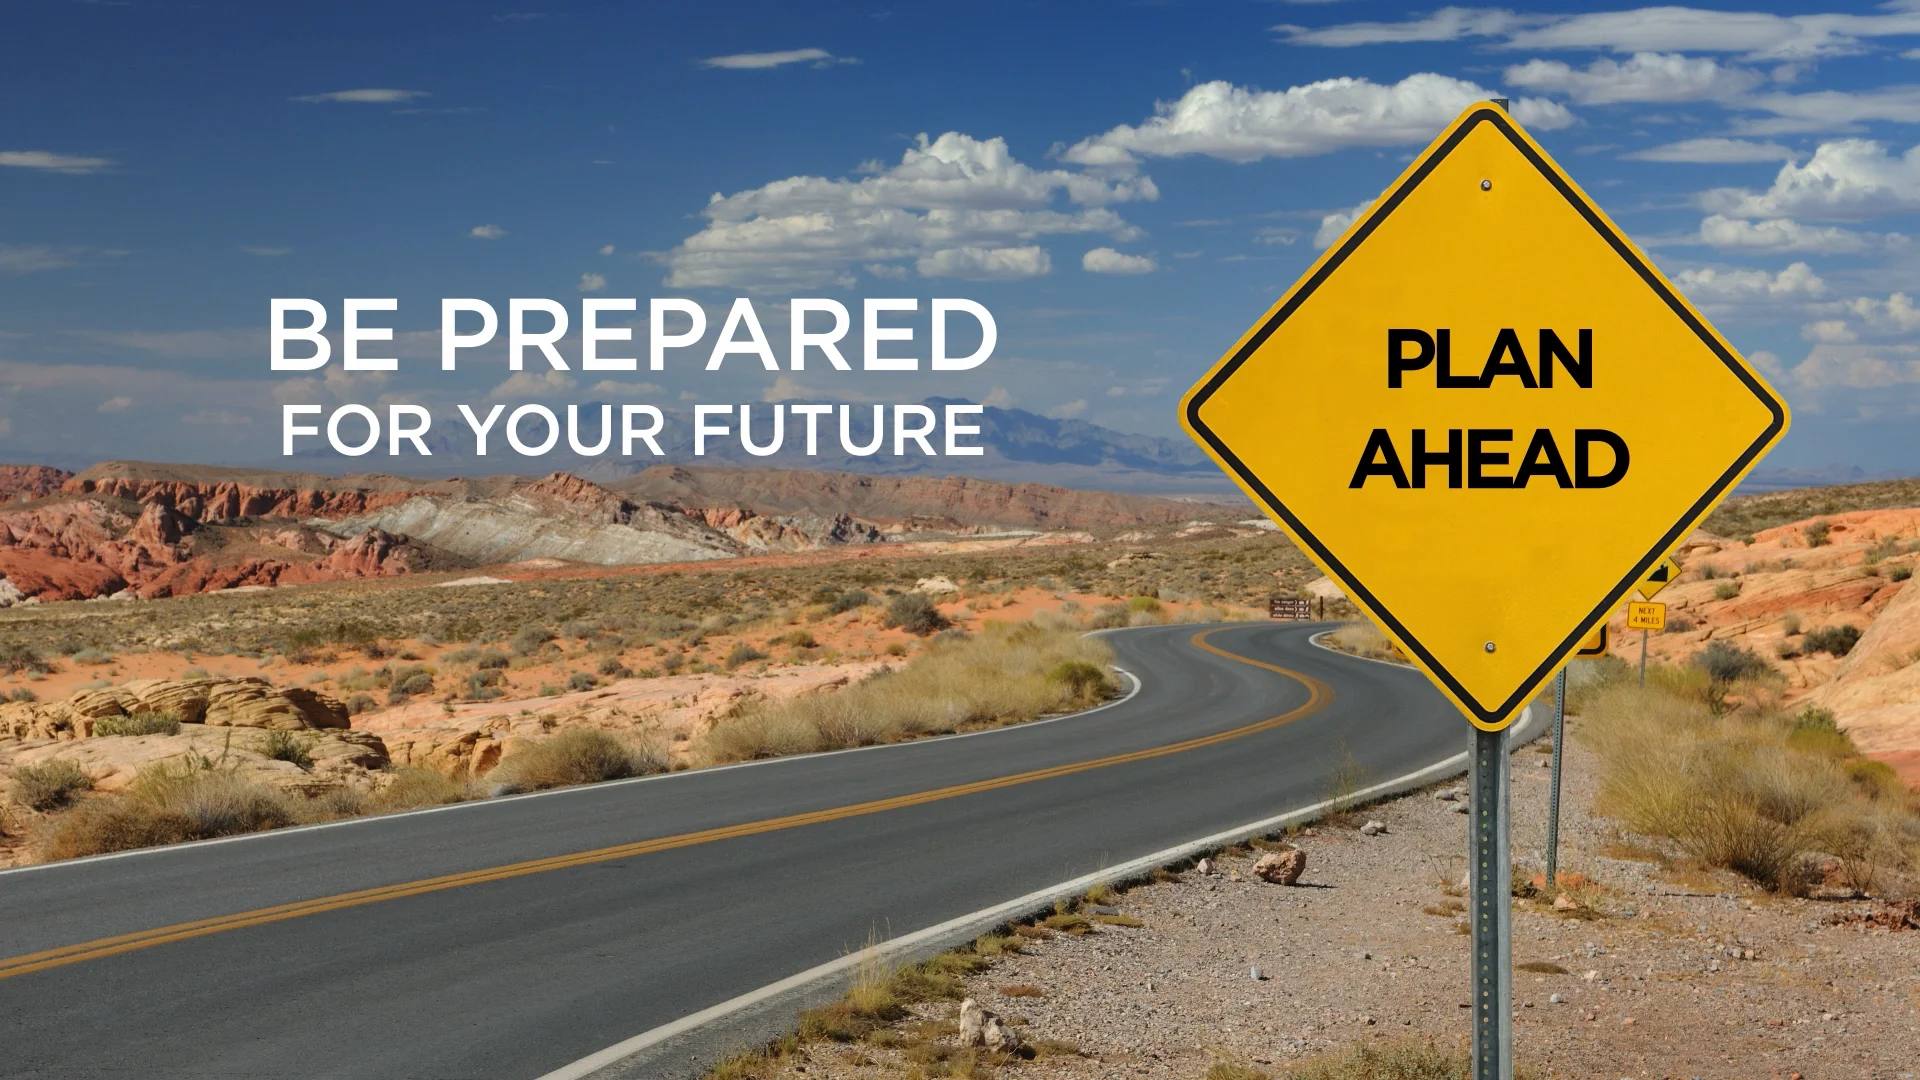 The Road Ahead: Plan for the Future